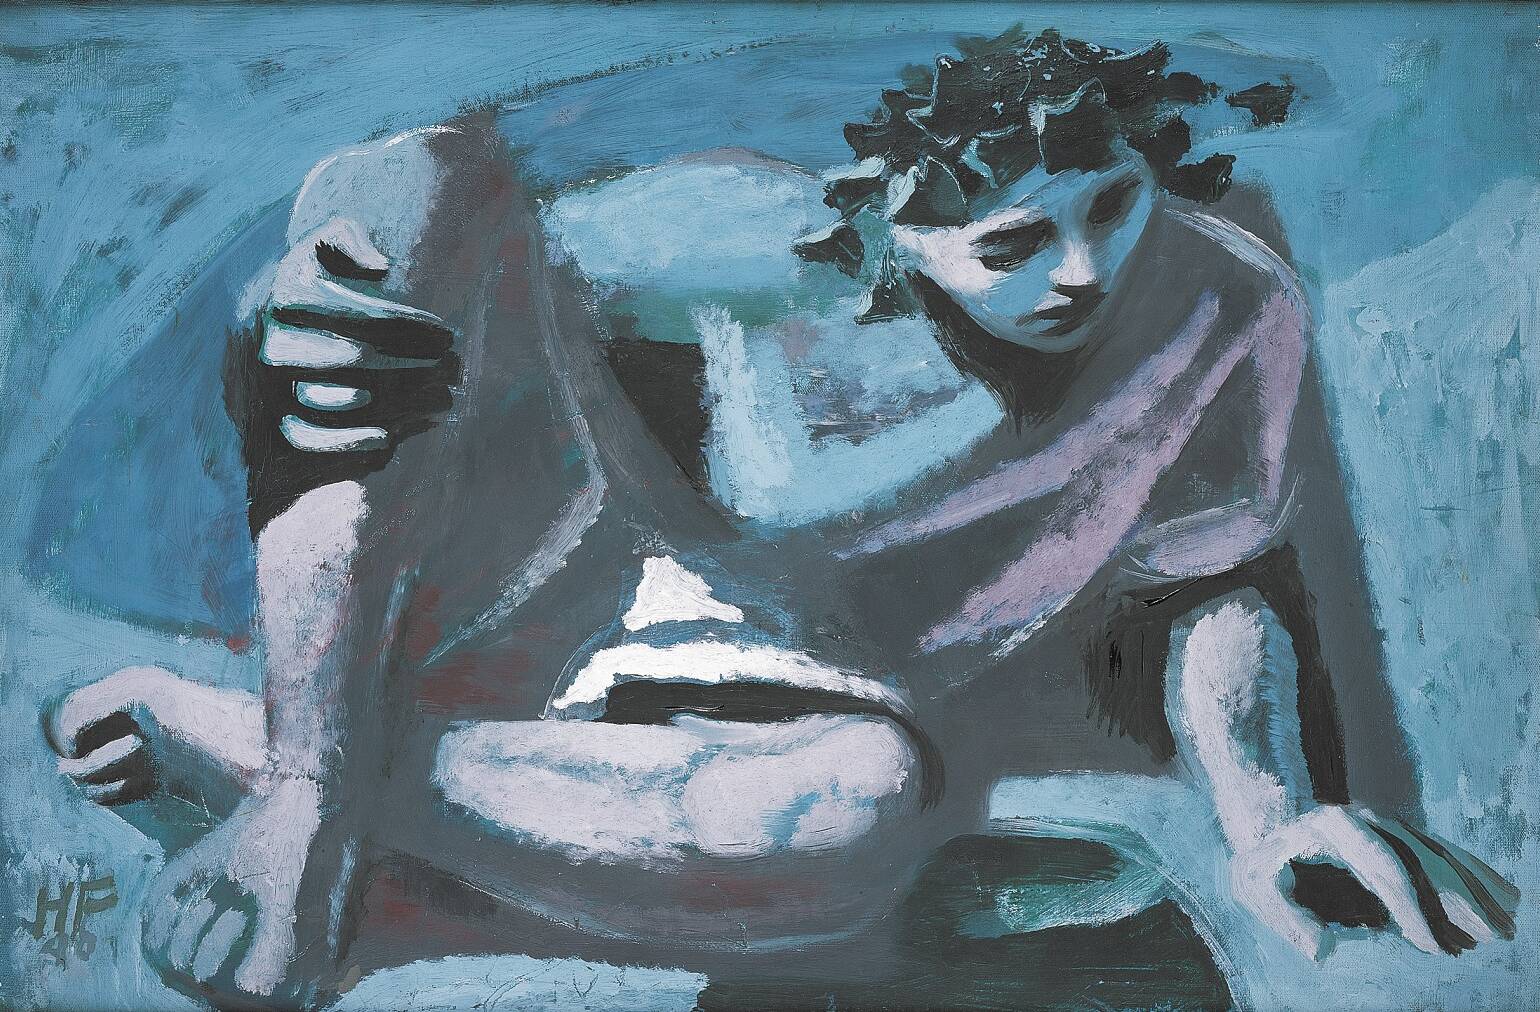 Blue toned painting of a young man with dark curly hair completely absorbed in looking at his reflection in an unseen pool at the bottom of the painting.